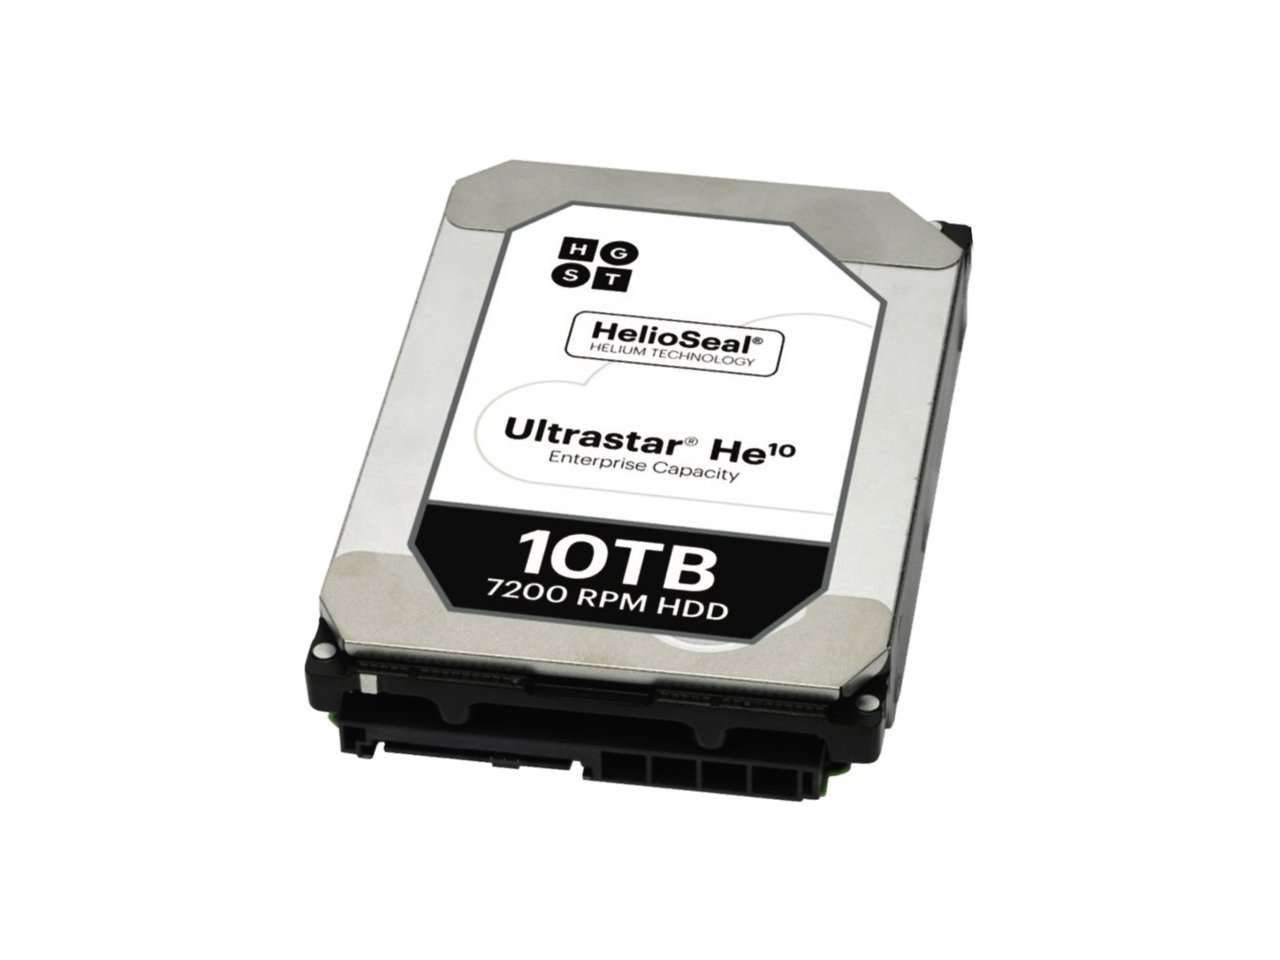 HGST Ultrastar He10 0F27359 HUH721008AL5205 8TB 7.2K RPM SAS 12Gb/s 512e 256MB Cache 3.5" TCG FIPS HDD